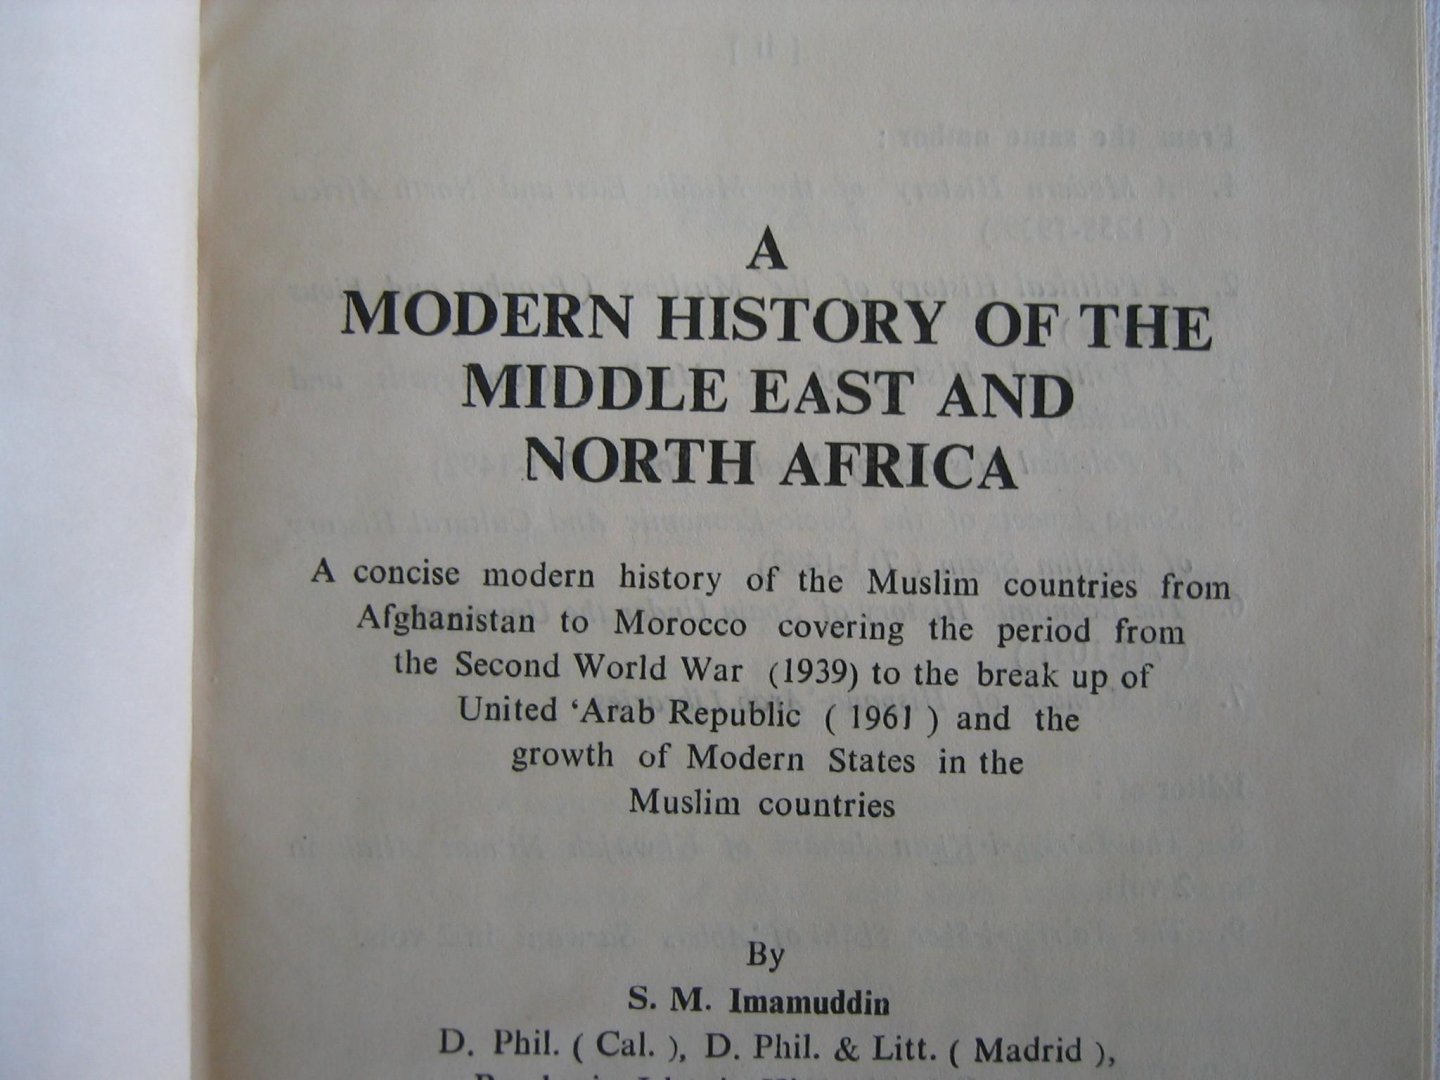 Imamuddin, S.M. - A Modern history of the Middle East and North Africa